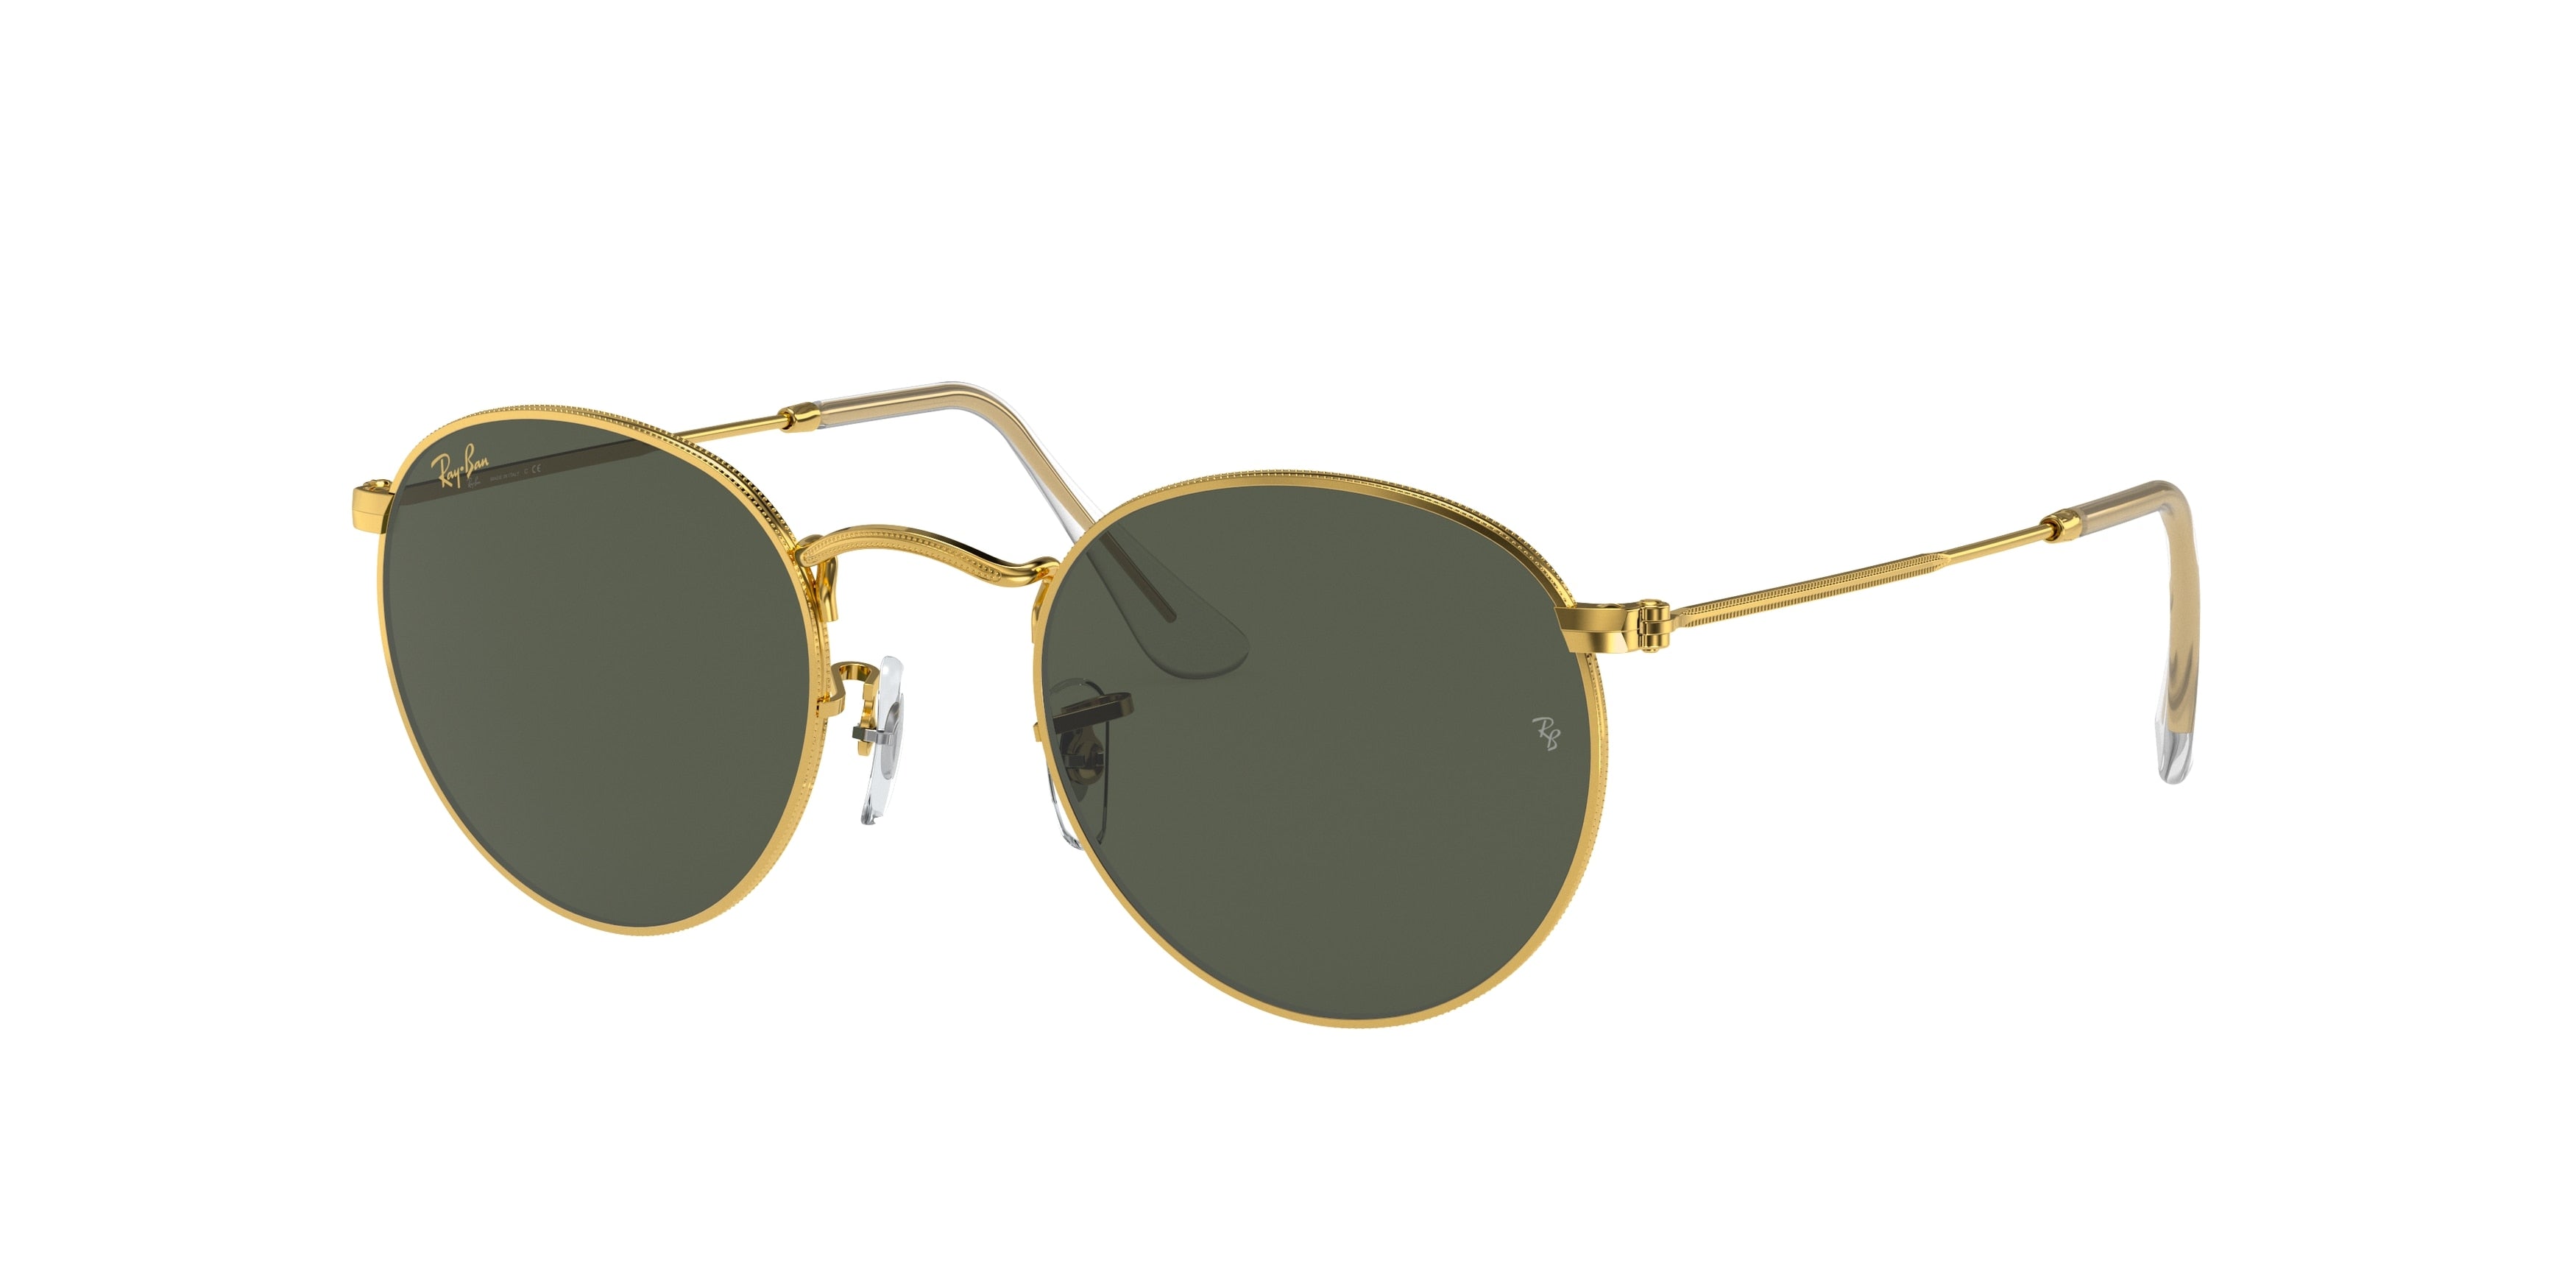 Ray-Ban ROUND METAL RB3447 Round Sunglasses  919631-Gold 52-145-21 - Color Map Gold